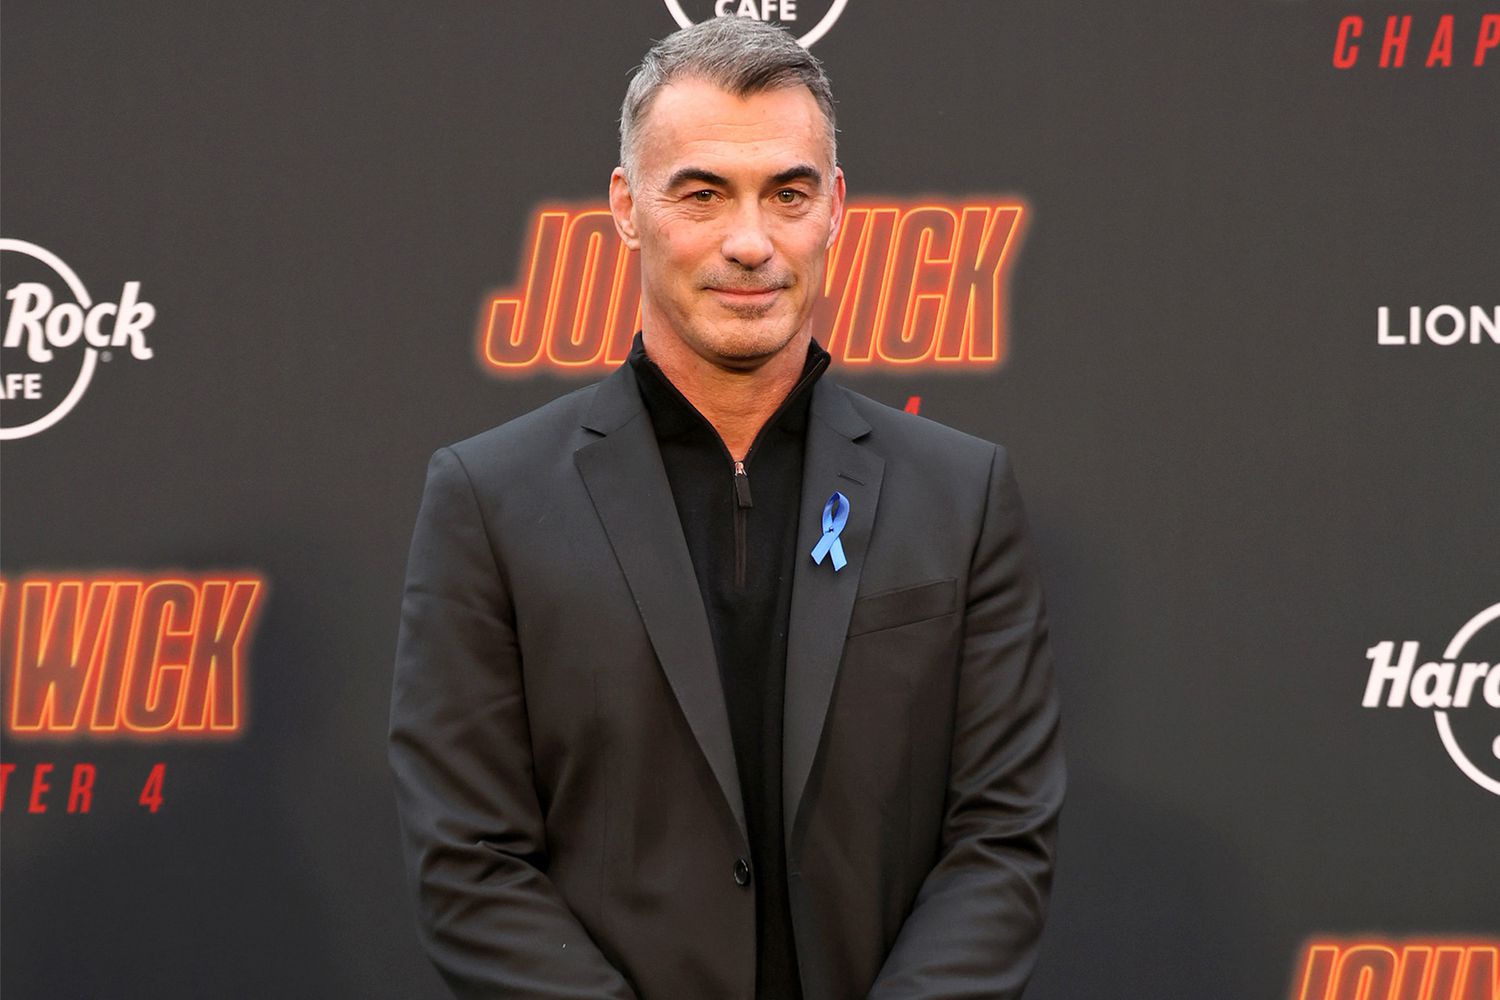 Chad Stahelski attends the Premiere Of Lionsgate's "John Wick: Chapter 4" at TCL Chinese Theatre on March 20, 2023 in Hollywood, California.